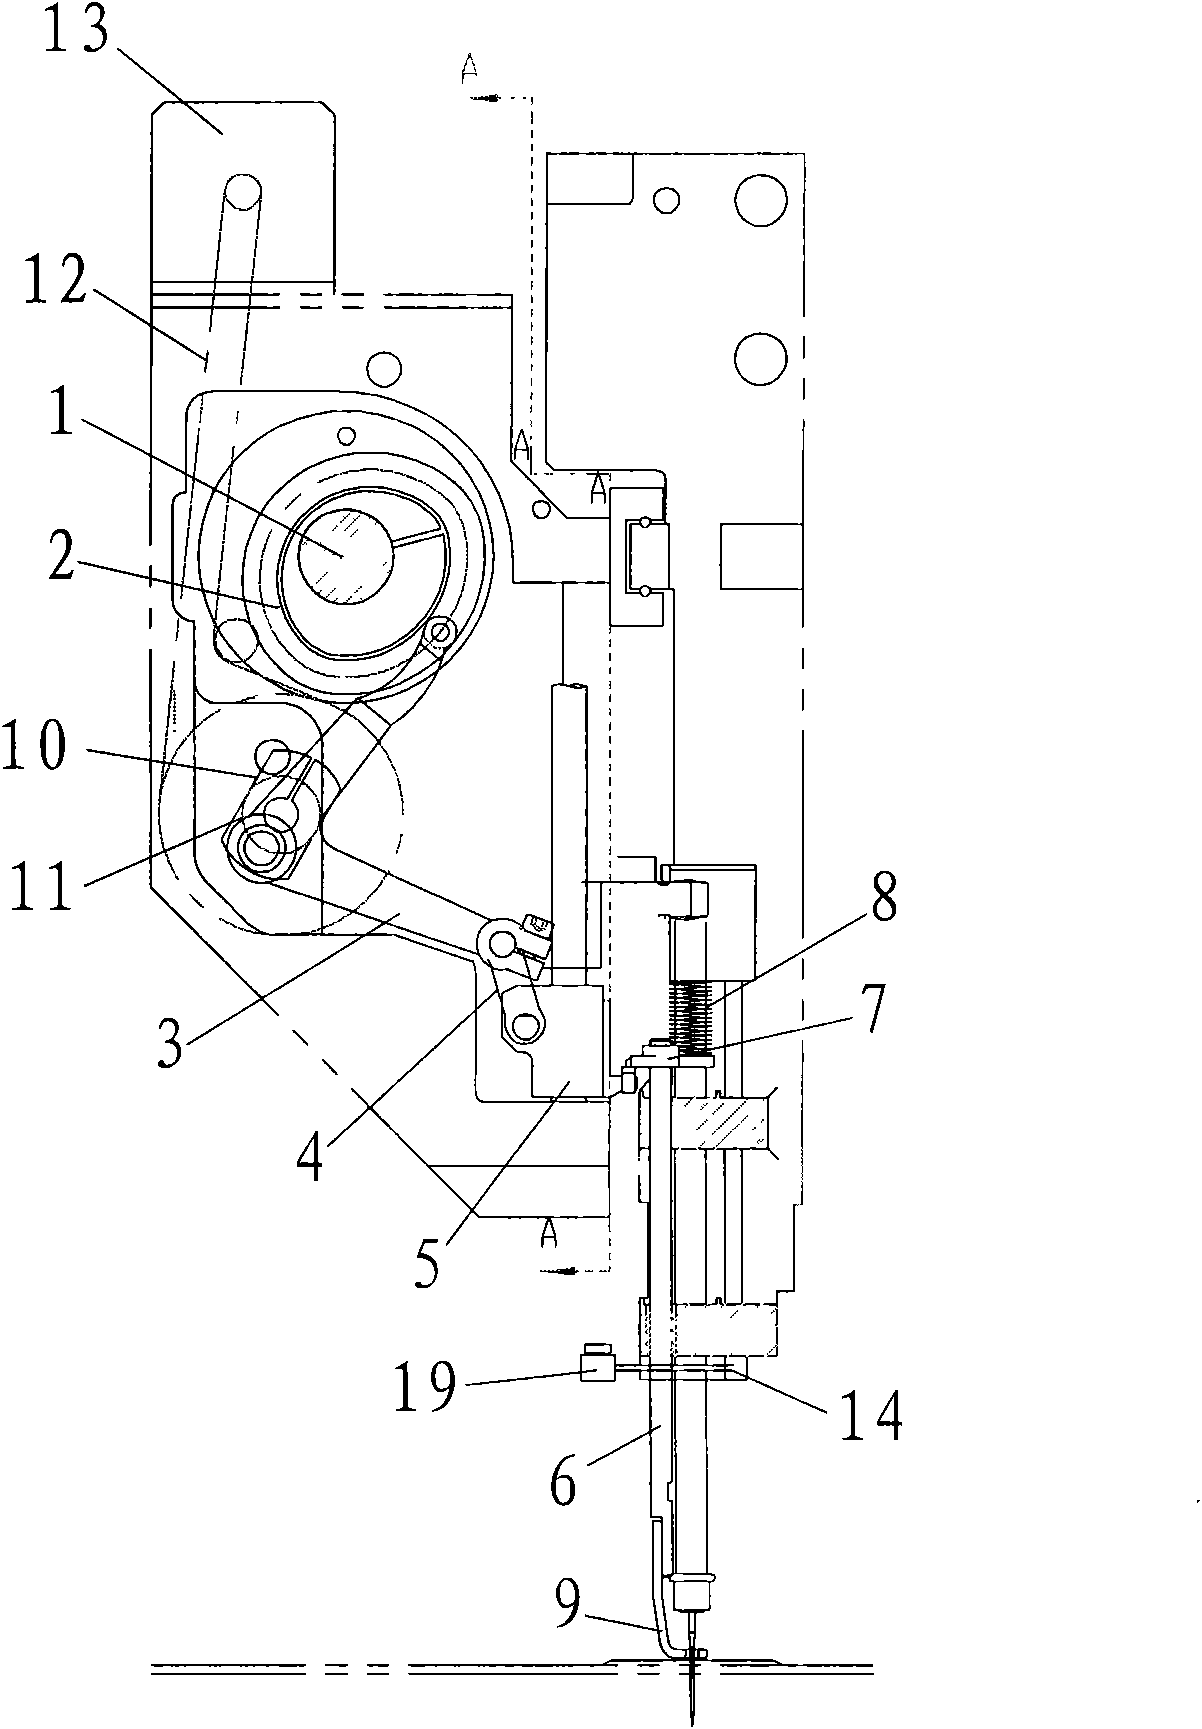 Presser foot independent driving mechanism for embroidery machine